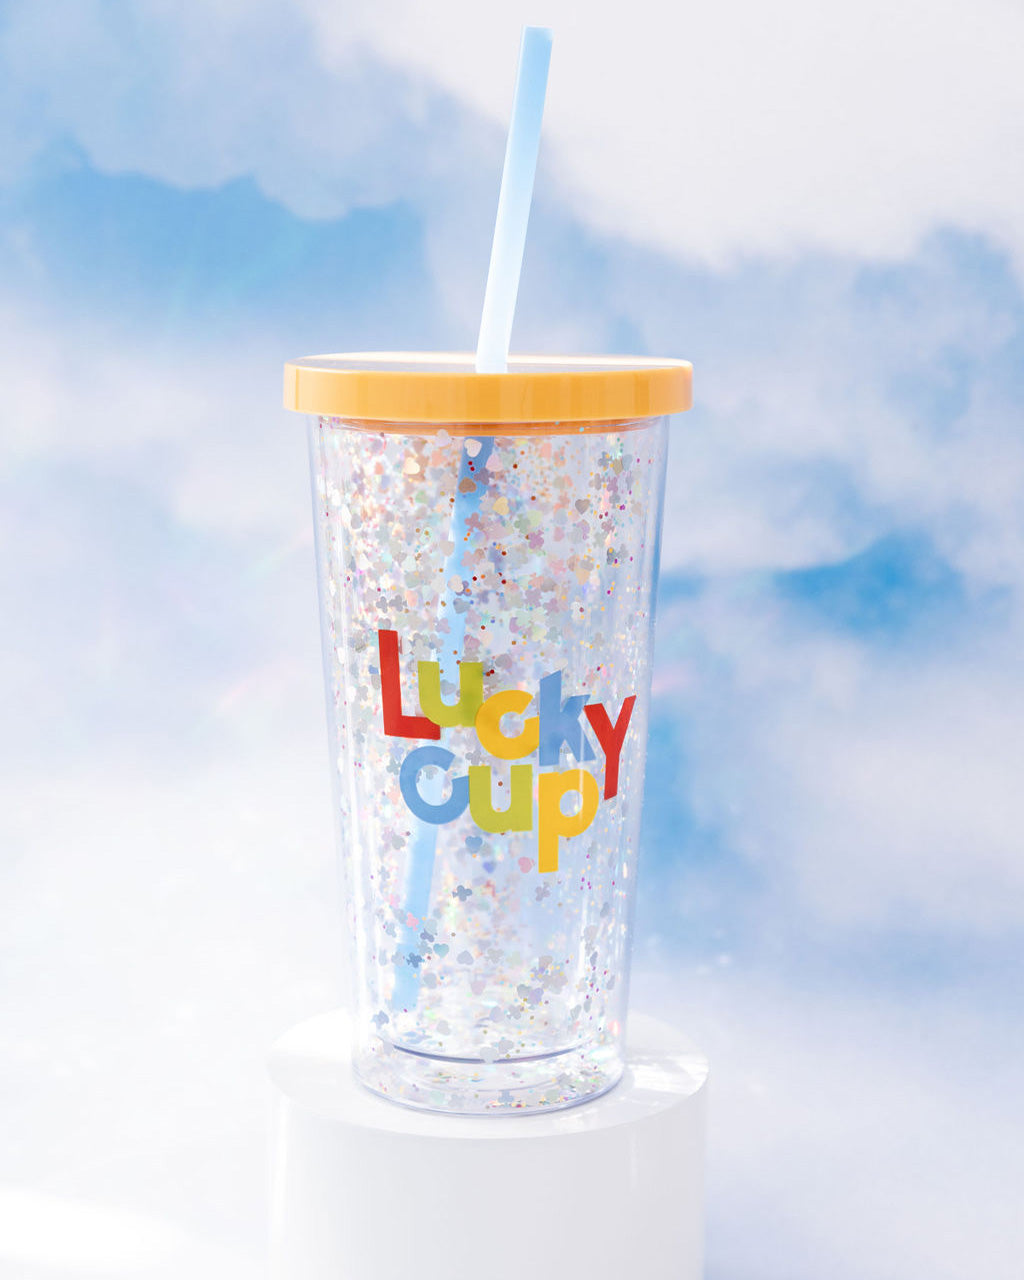 https://cdn.shopify.com/s/files/1/0787/5255/products/bando-il-glitterbomb-sip-sip-tumbler-glitter-bomb-sip-sip-tumbler-with-straw-lucky-me-04.jpg?v=1686238786